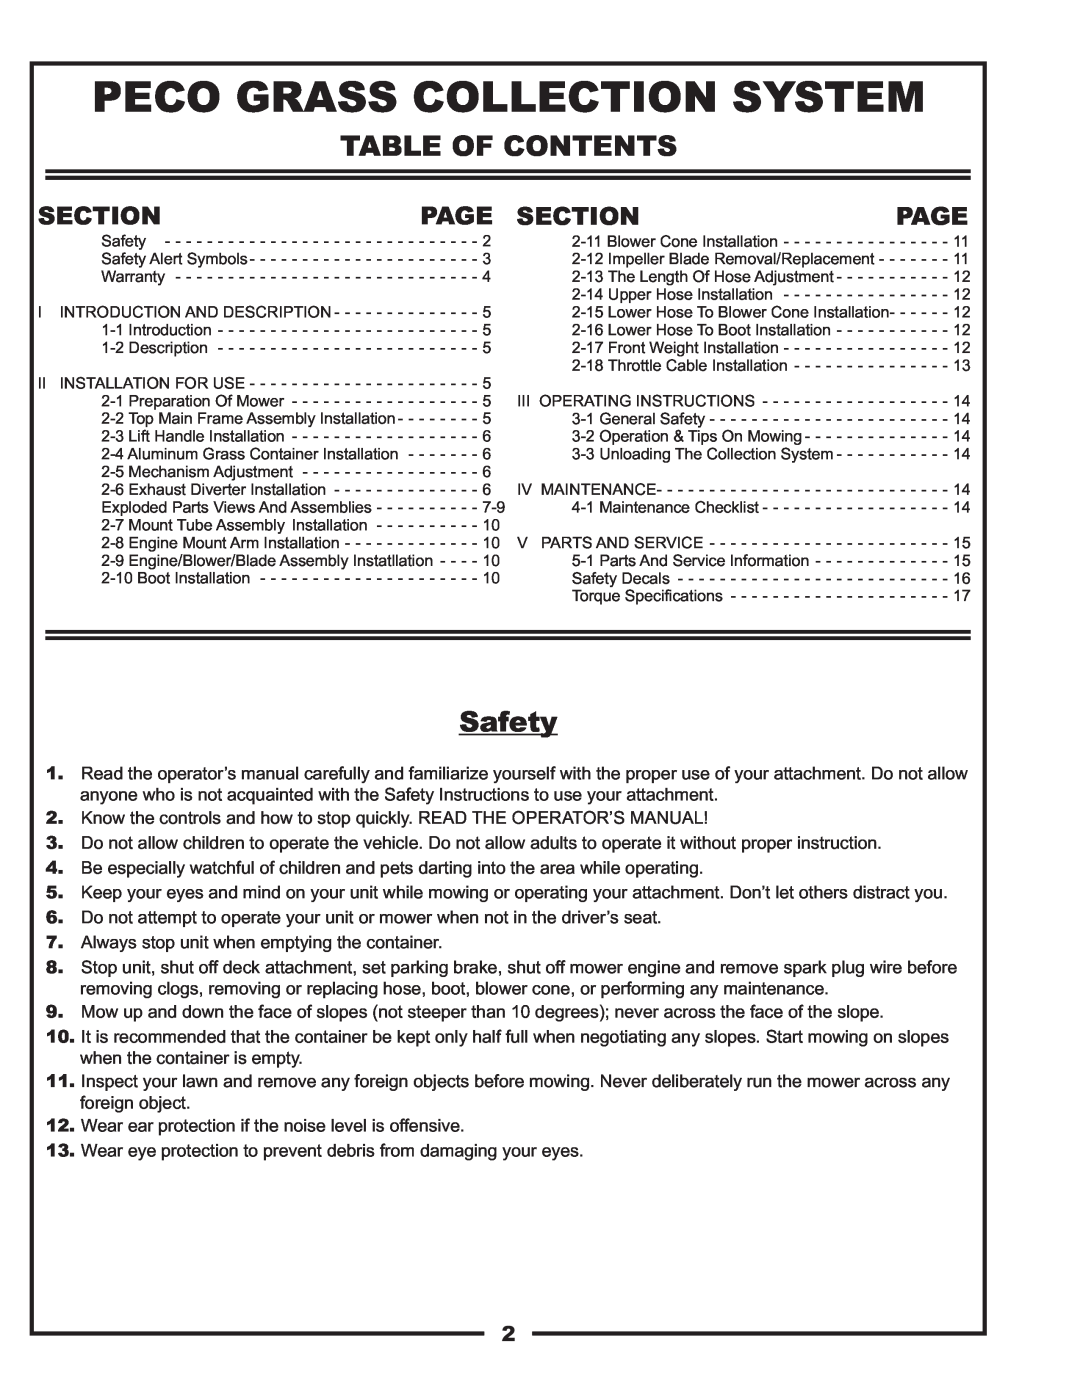 Scag Power Equipment 37621219, 37621220 manual Table Of Contents, Safety, Section, Page, Peco Grass Collection System 